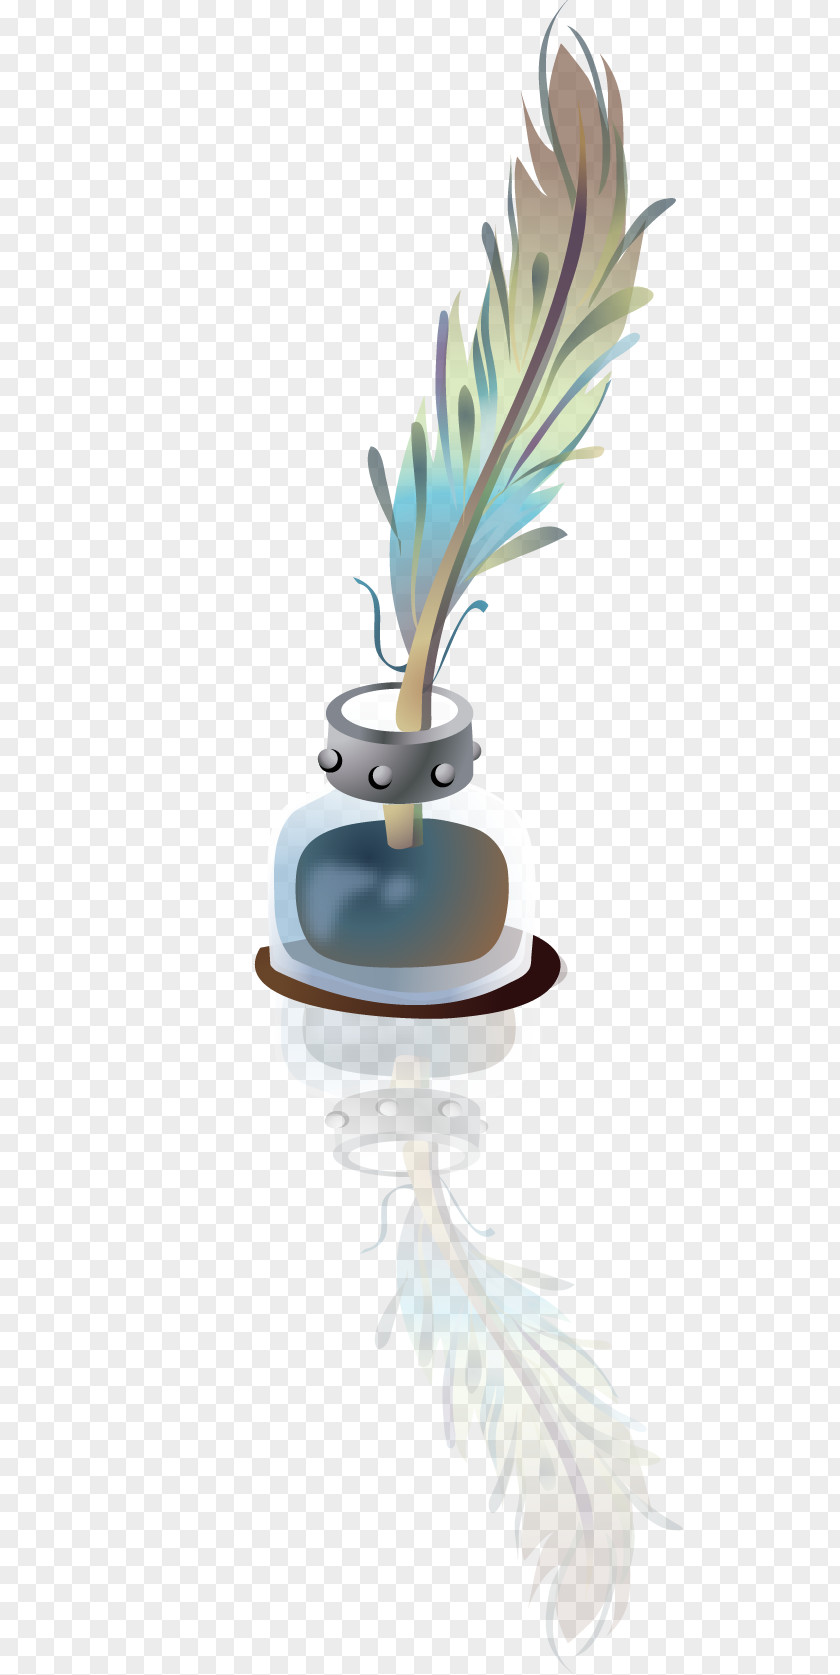 Cartoon Feather Quill Fountain Pen PNG